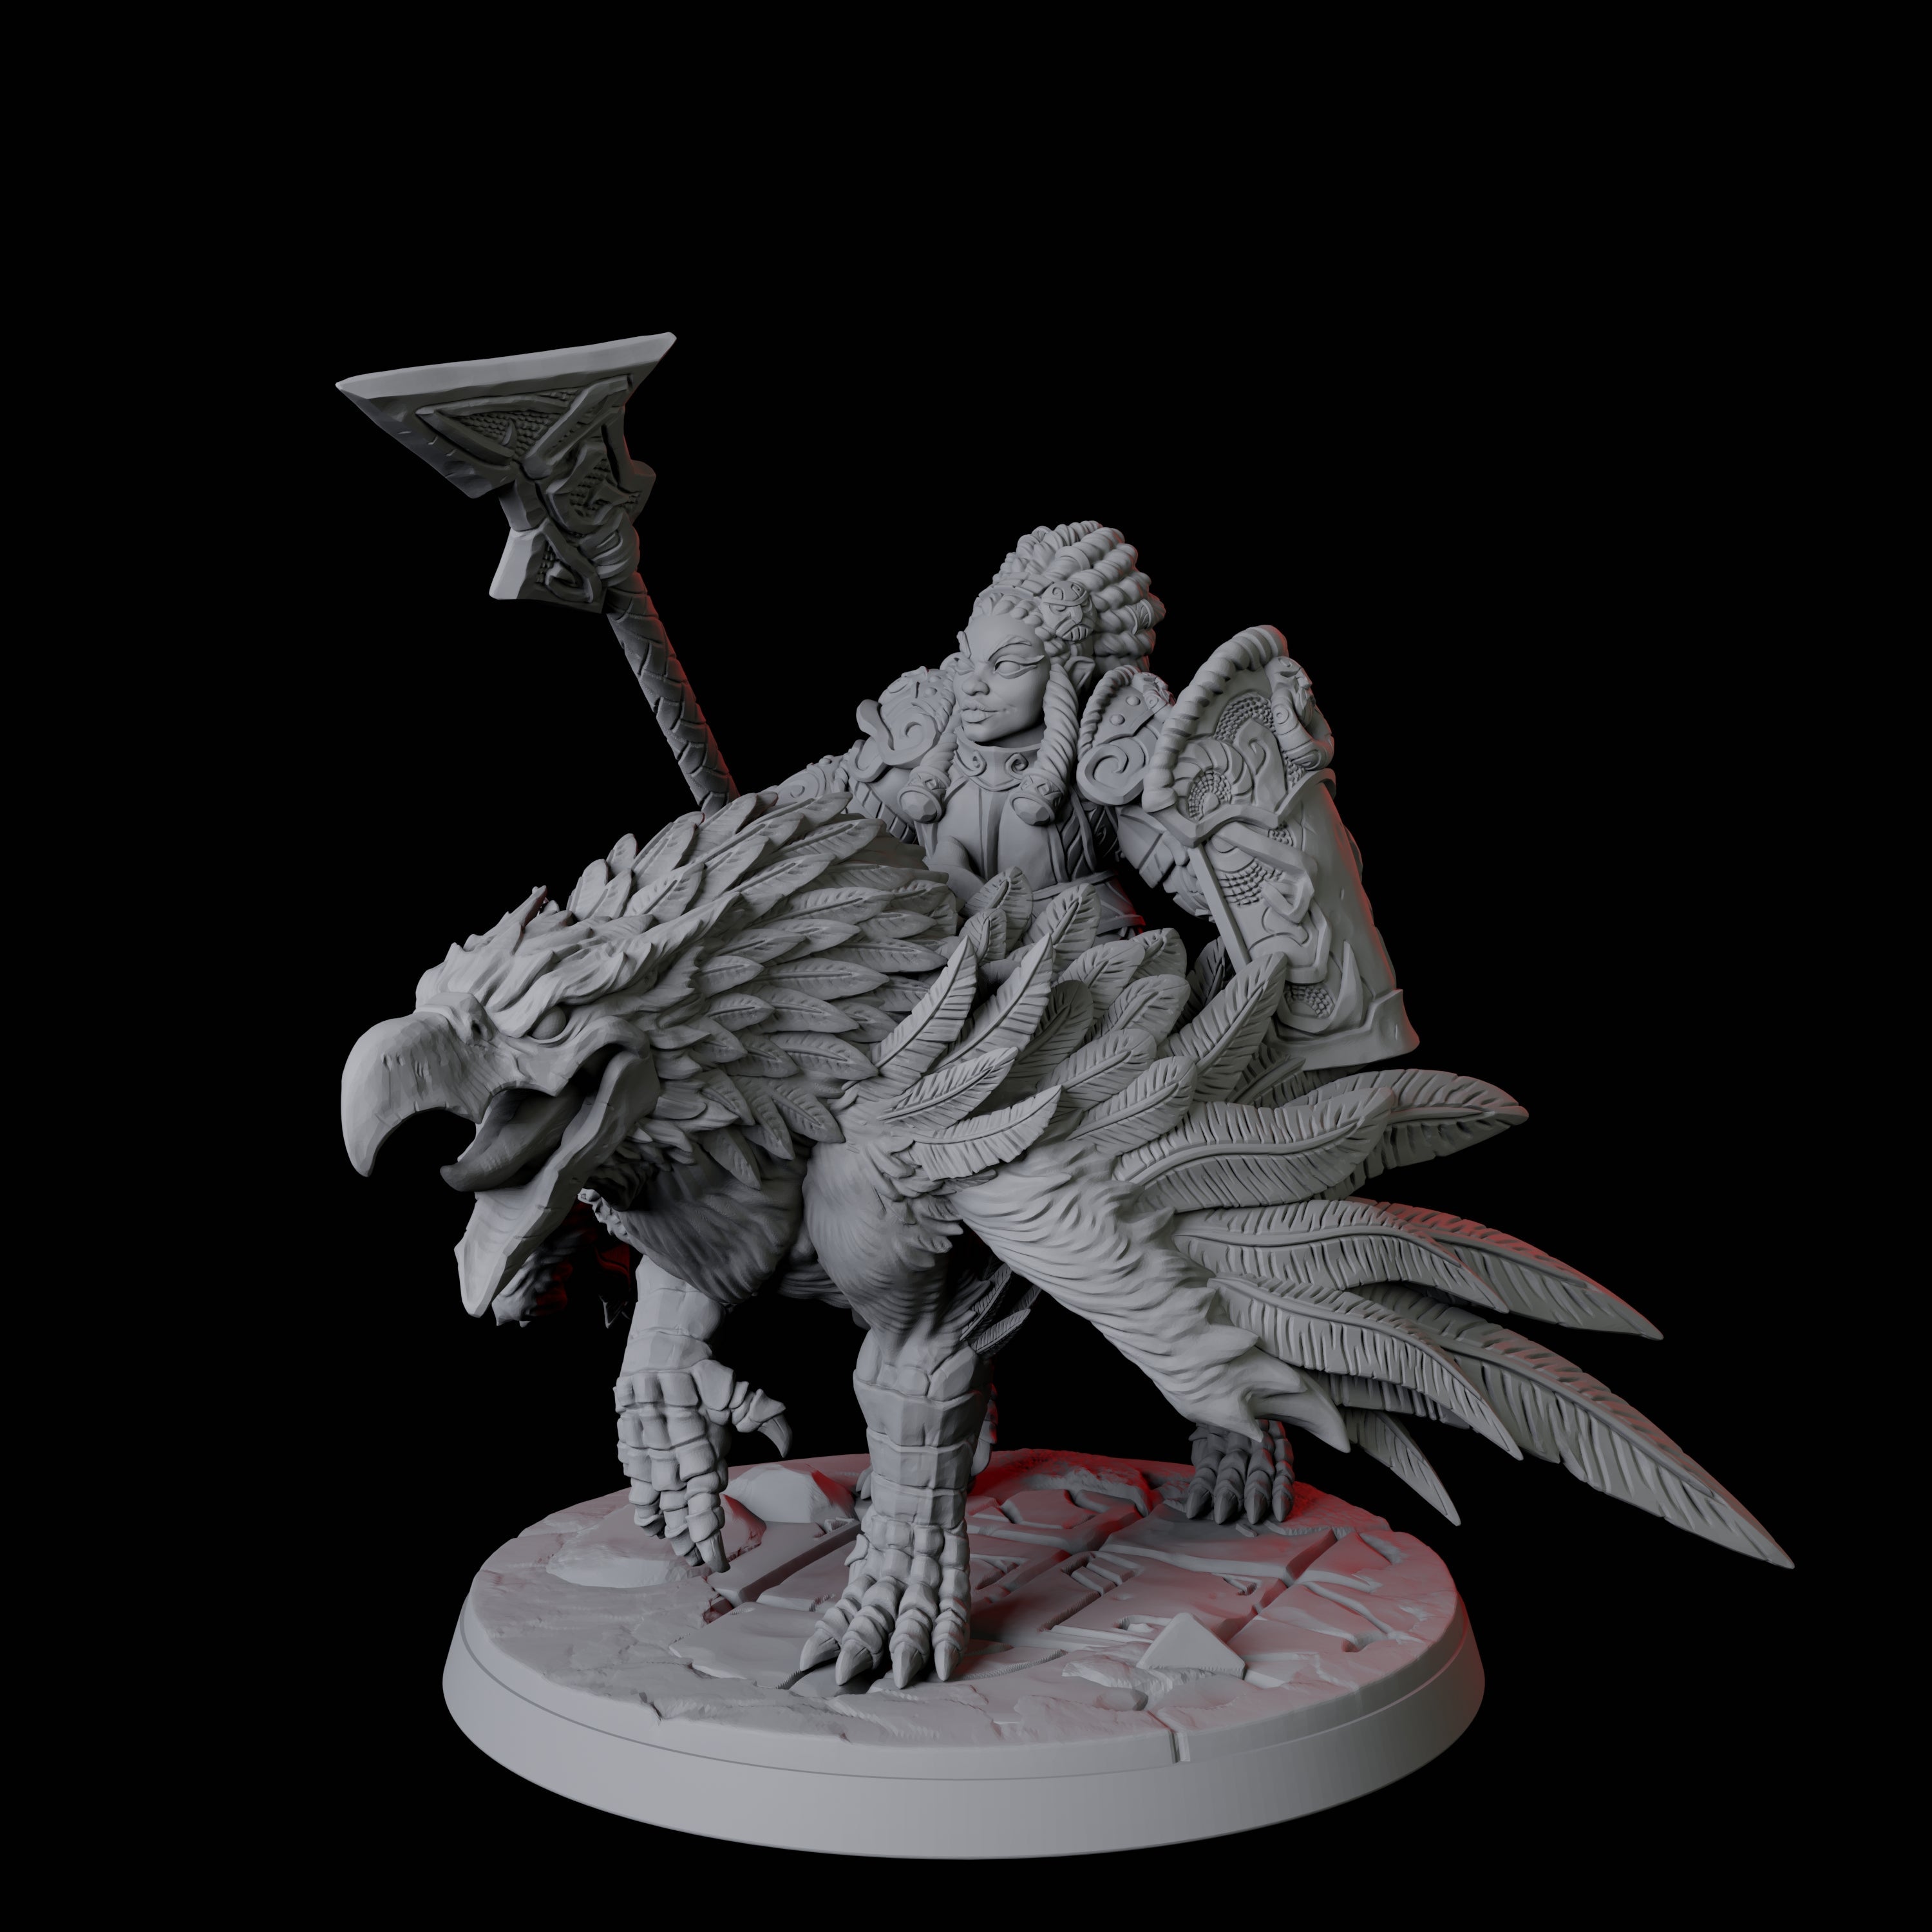 Dwarf Sky Cavalry D Miniature for Dungeons and Dragons, Pathfinder or other TTRPGs